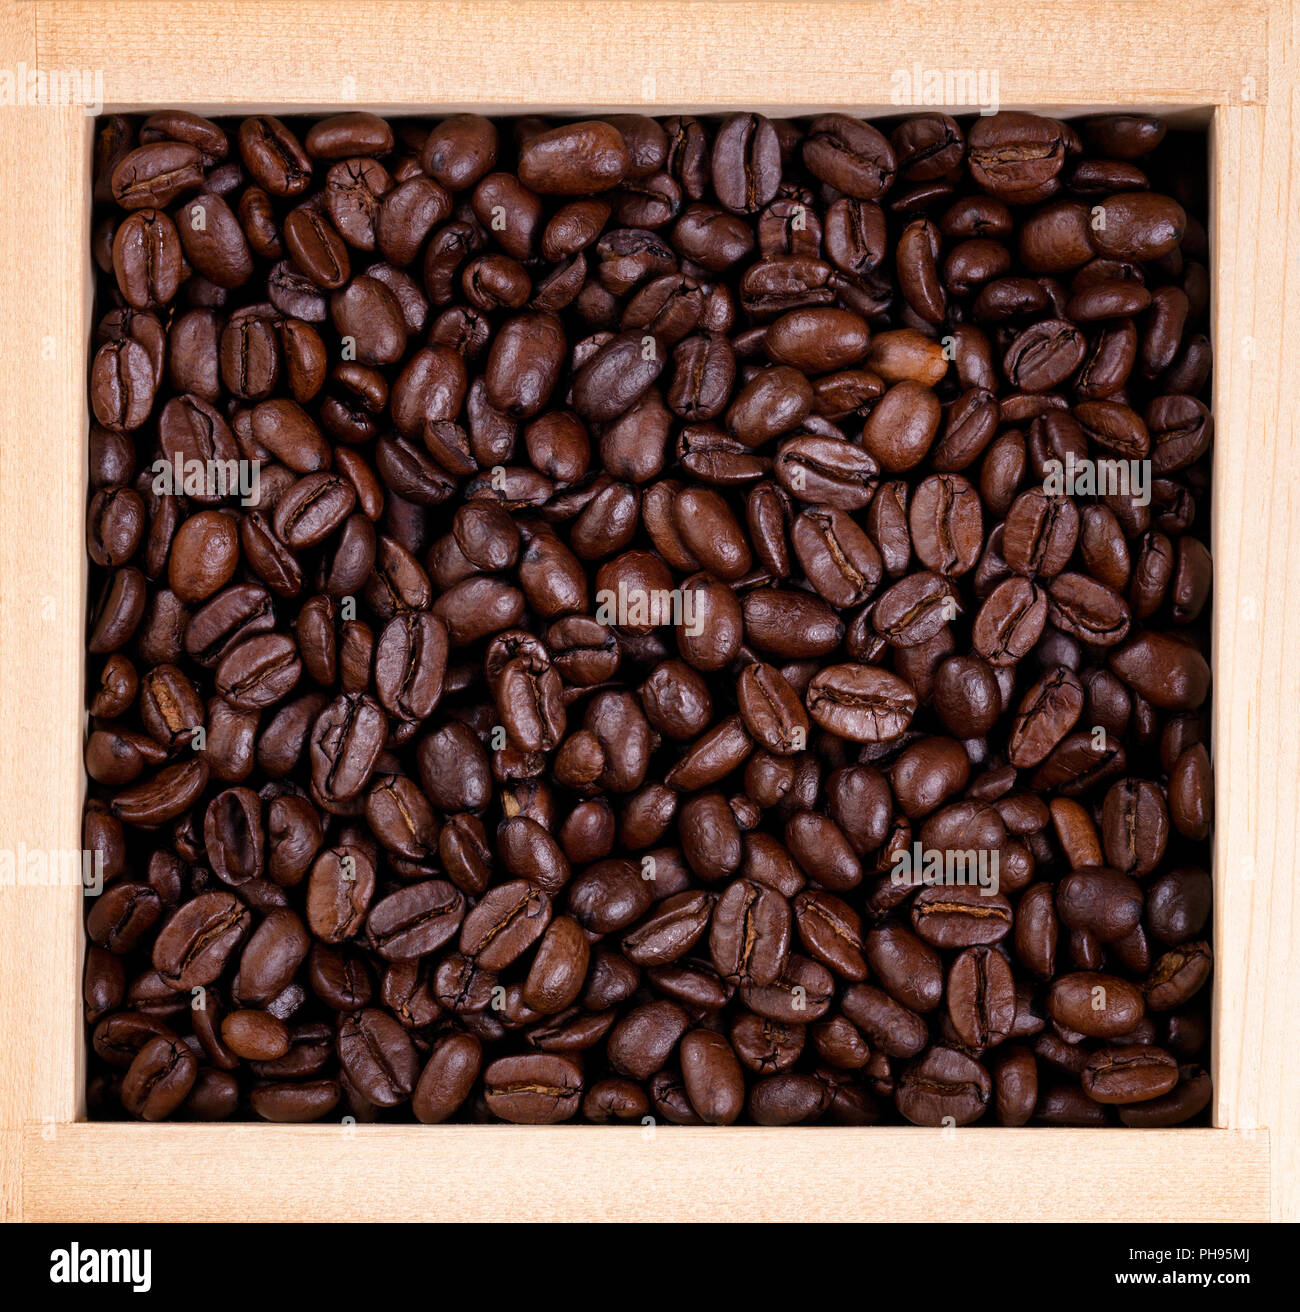 Freshly roasted coffee beans in wooden box frame Stock Photo